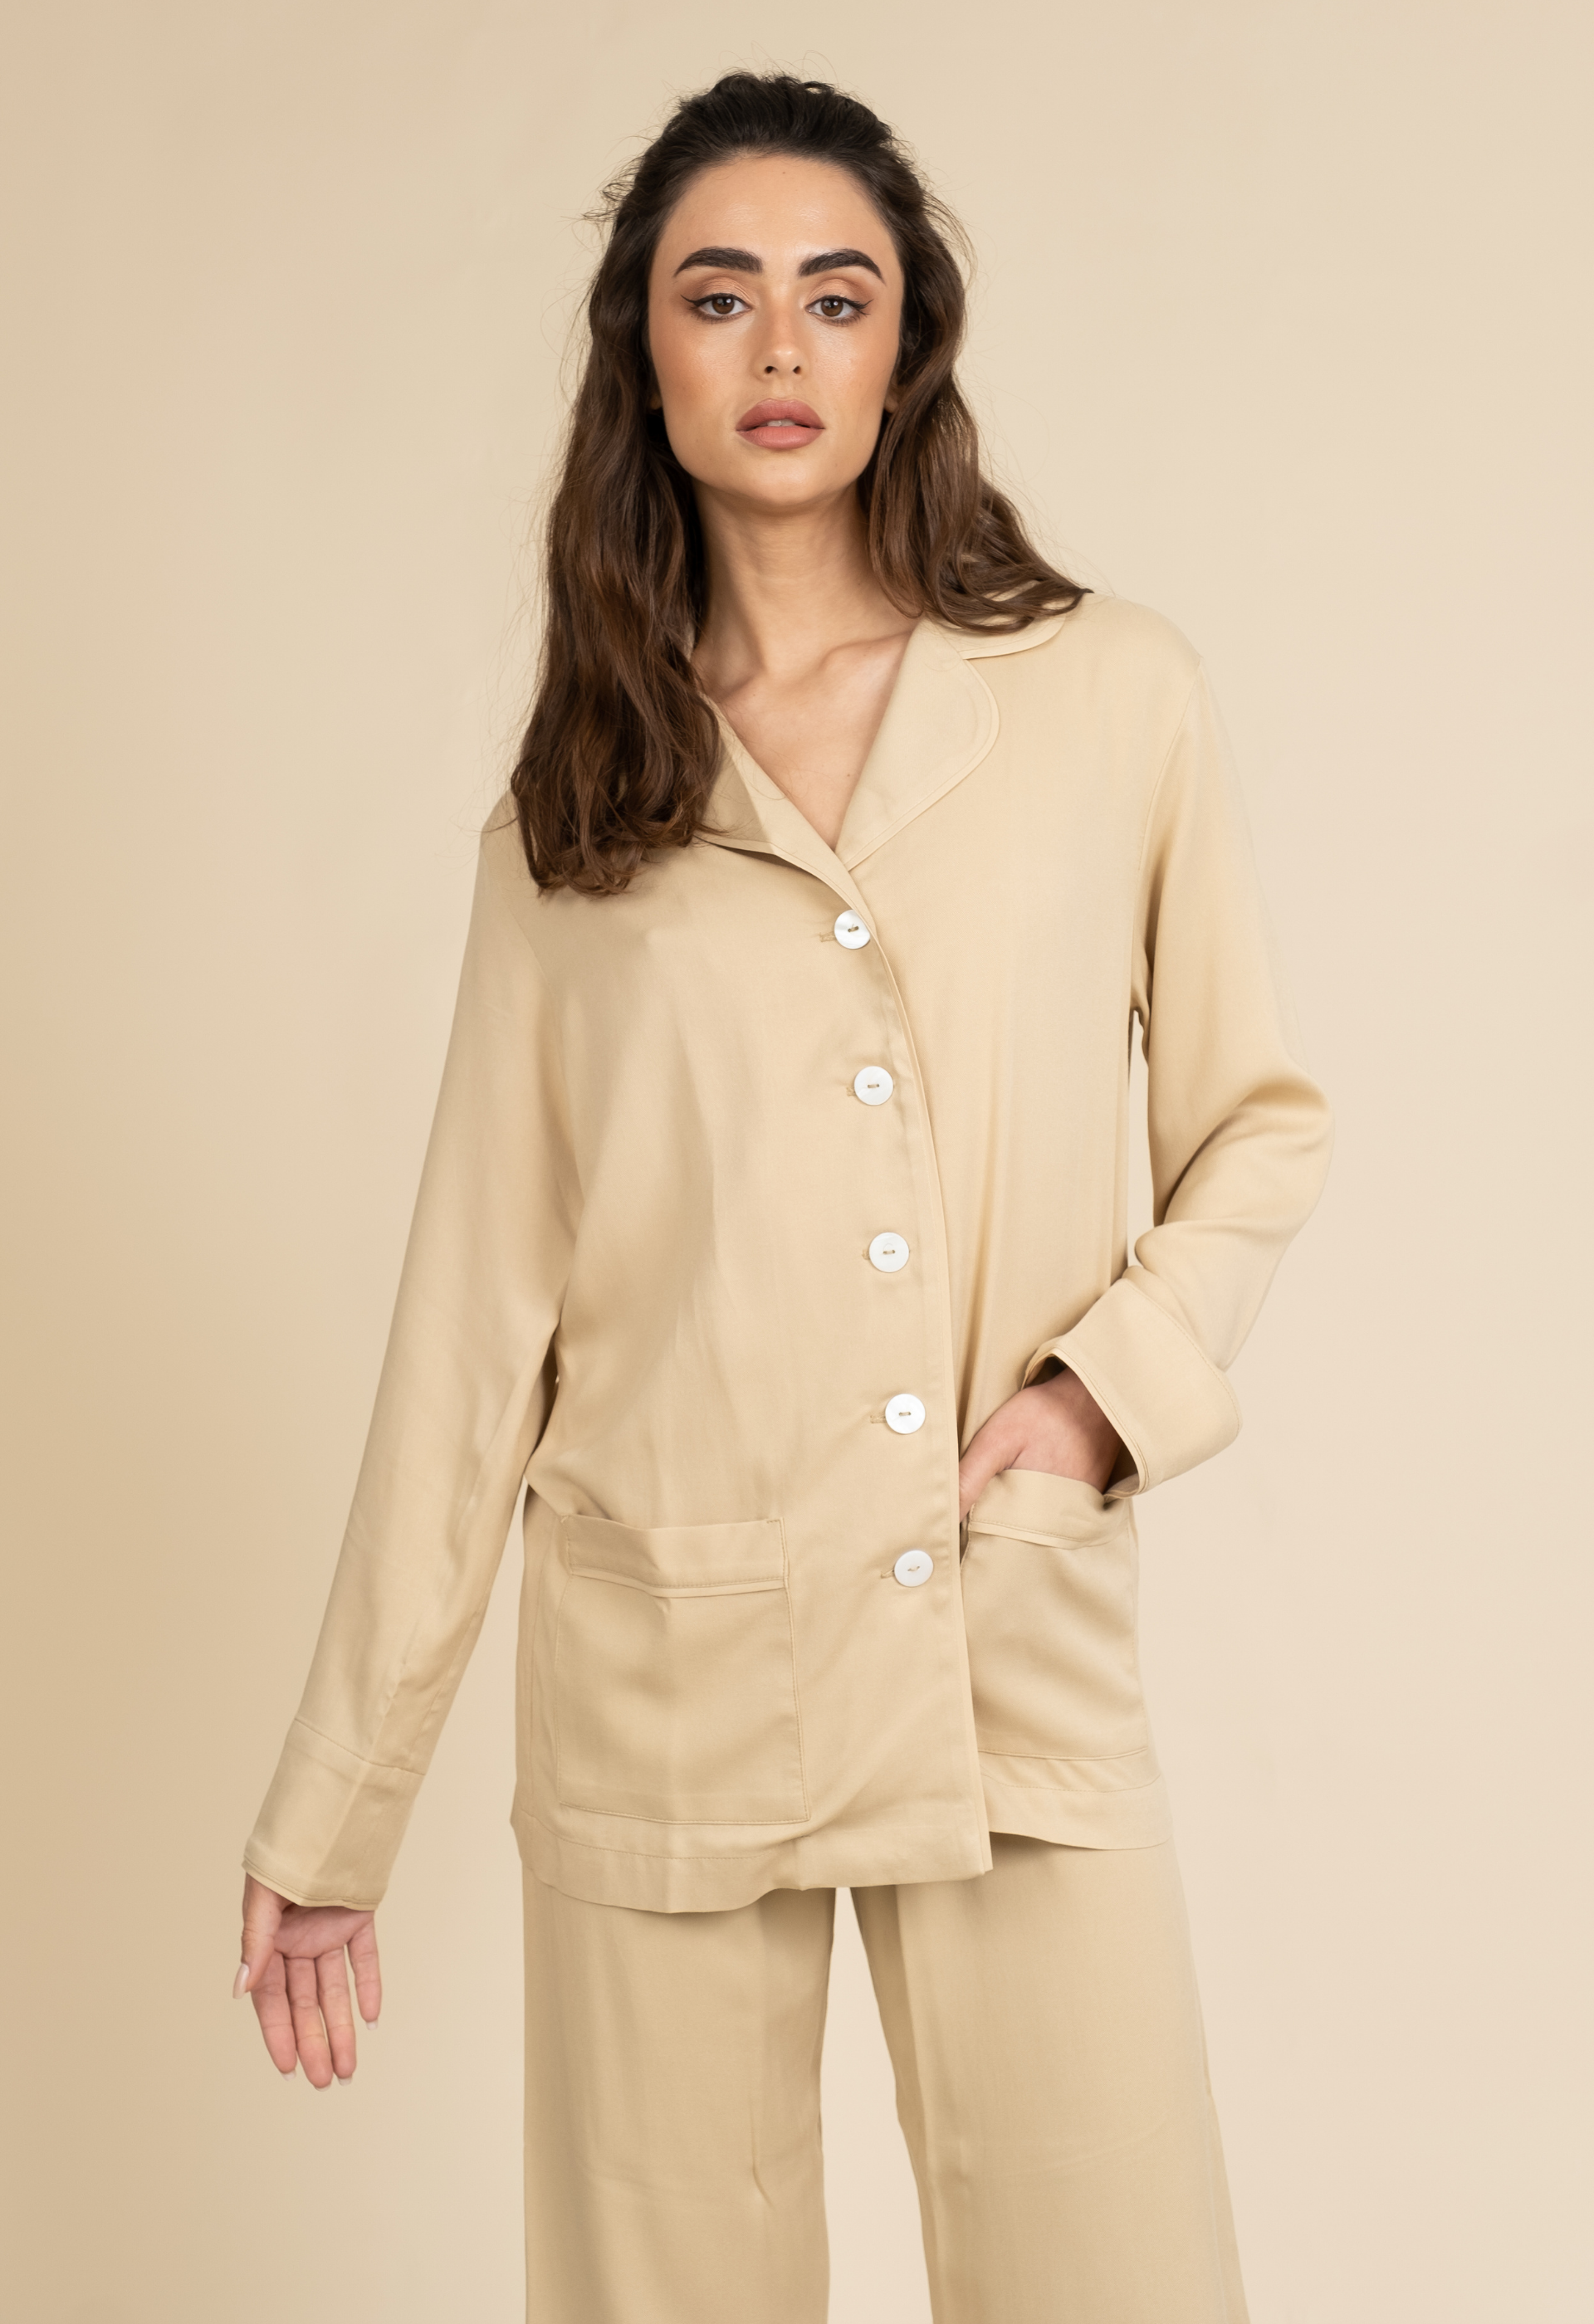 Party pajama set in beige